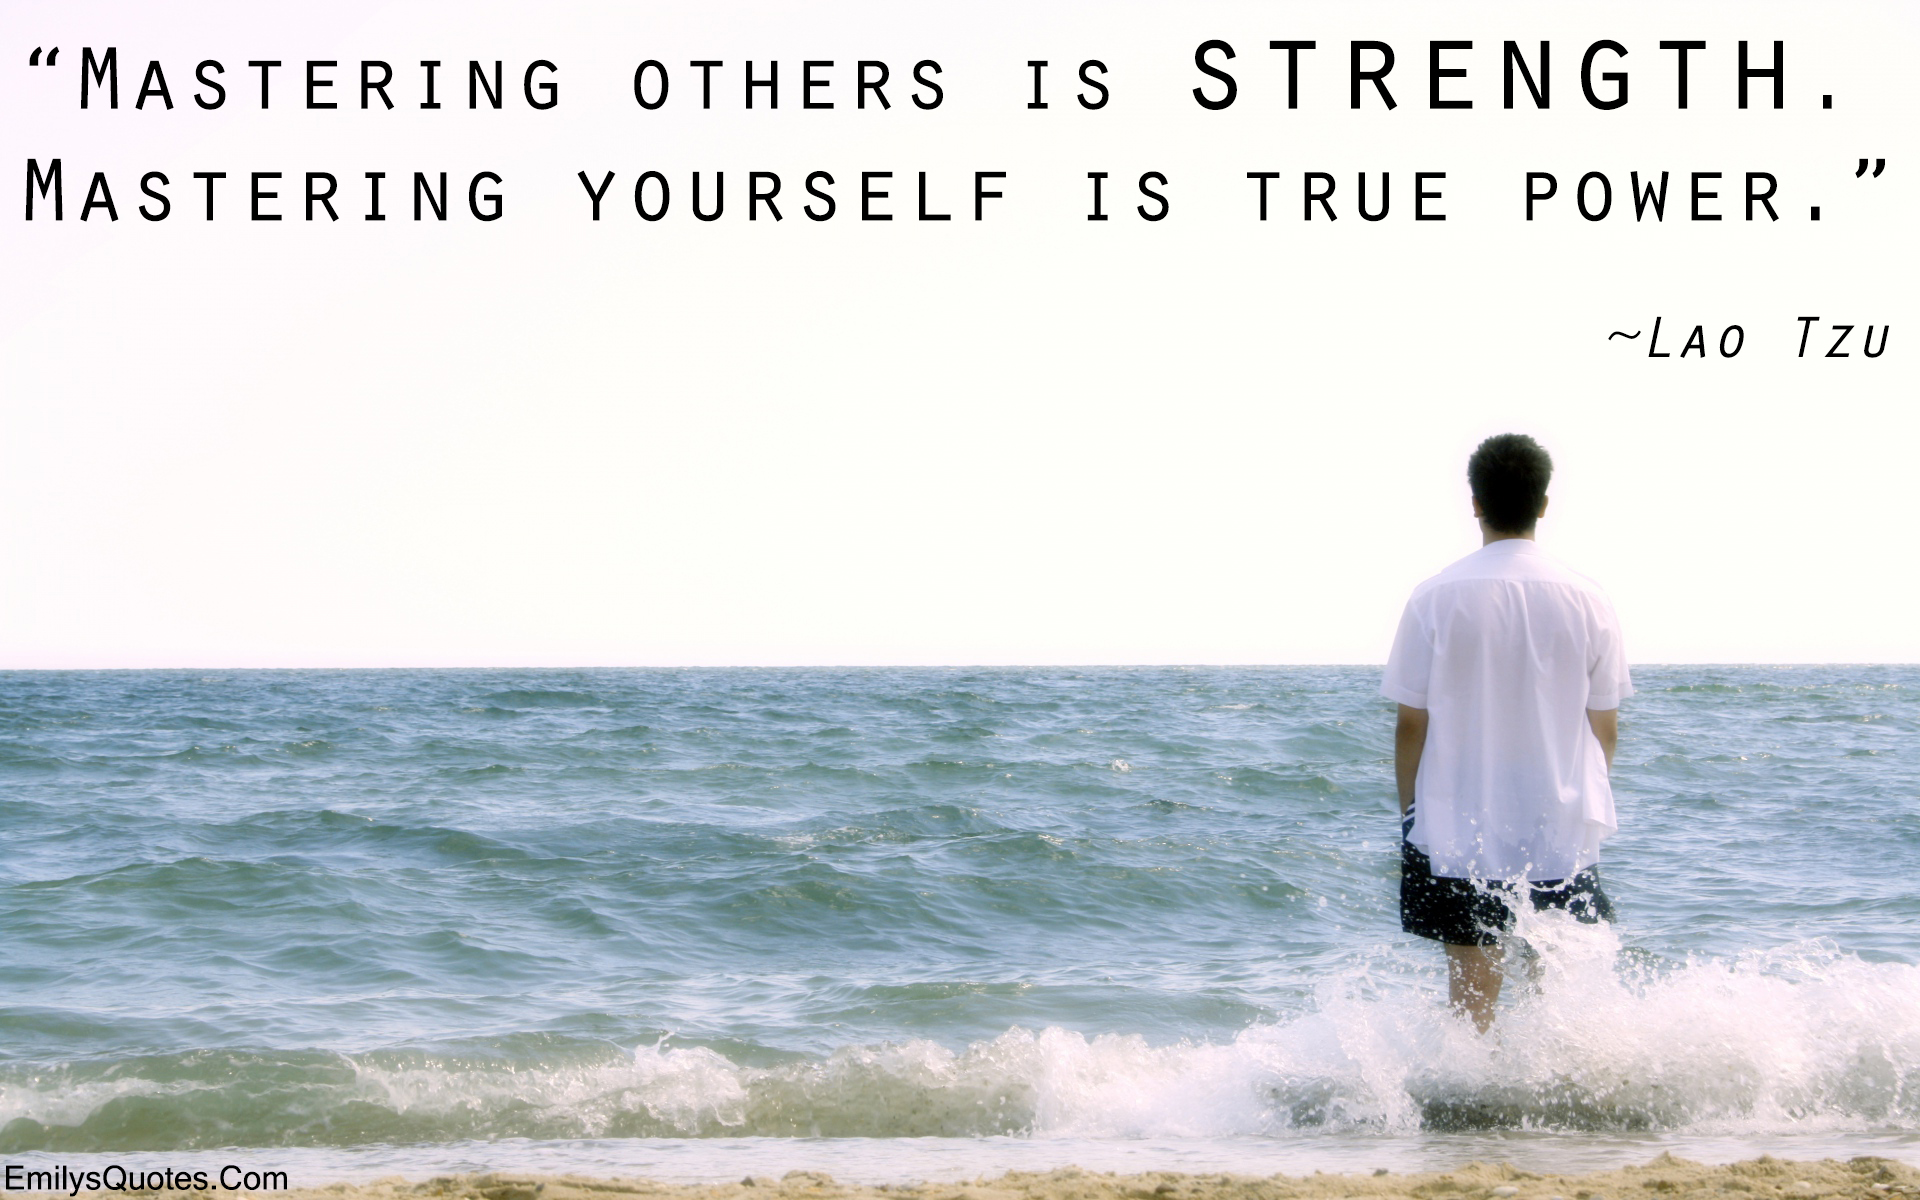 Mastering others is strength. Mastering yourself is true power